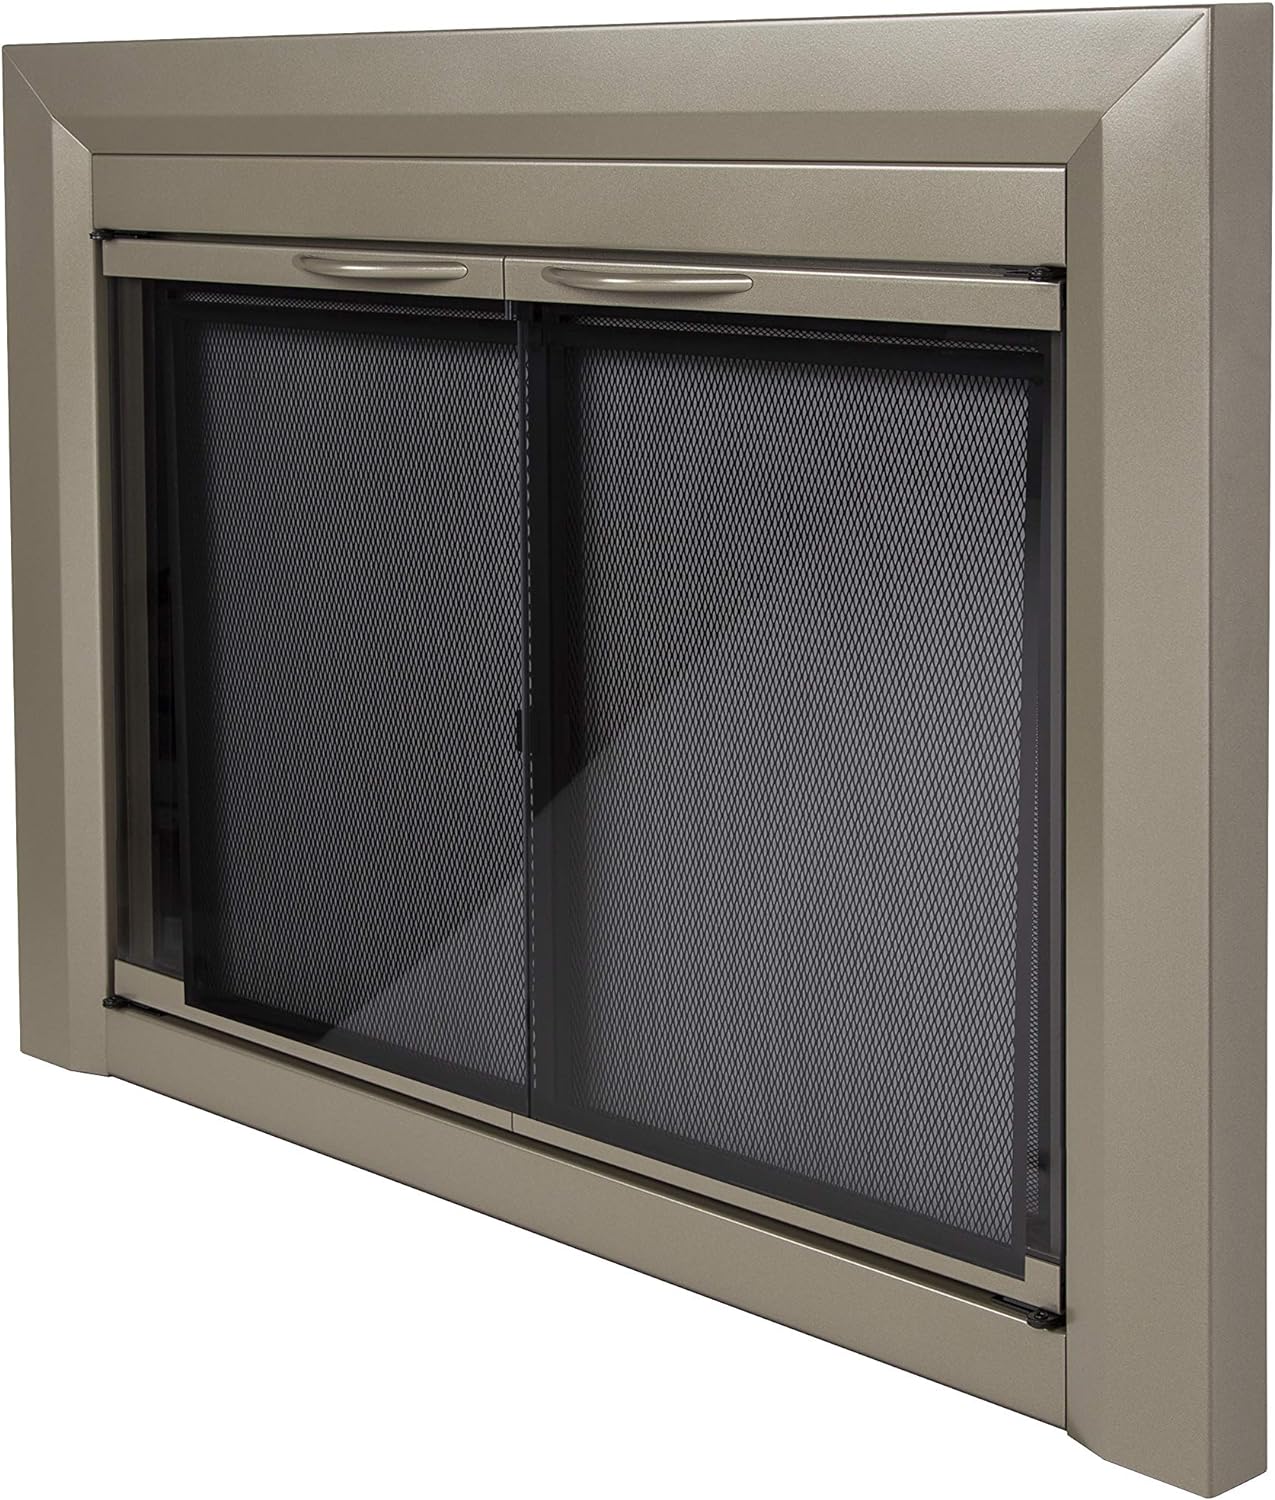 Pleasant Hearth Cb 3302 Colby Fireplace, Pleasant Hearth Cb 3302 Colby Fireplace Glass Door